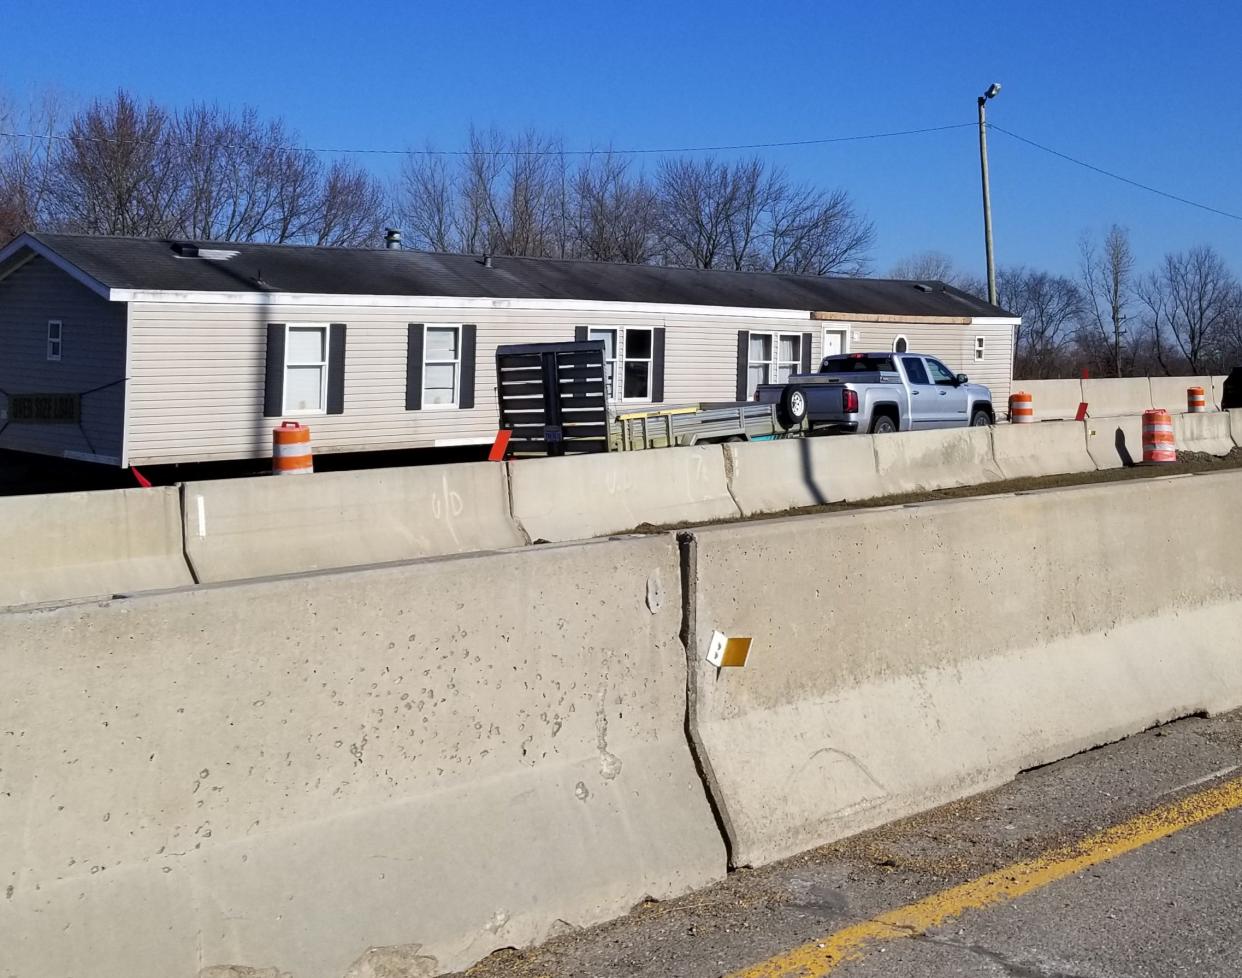 Photos show a mobile home stuck on an Ohio highway after the driver hauling the home had to leave it when its width wouldn't make it through a detour.